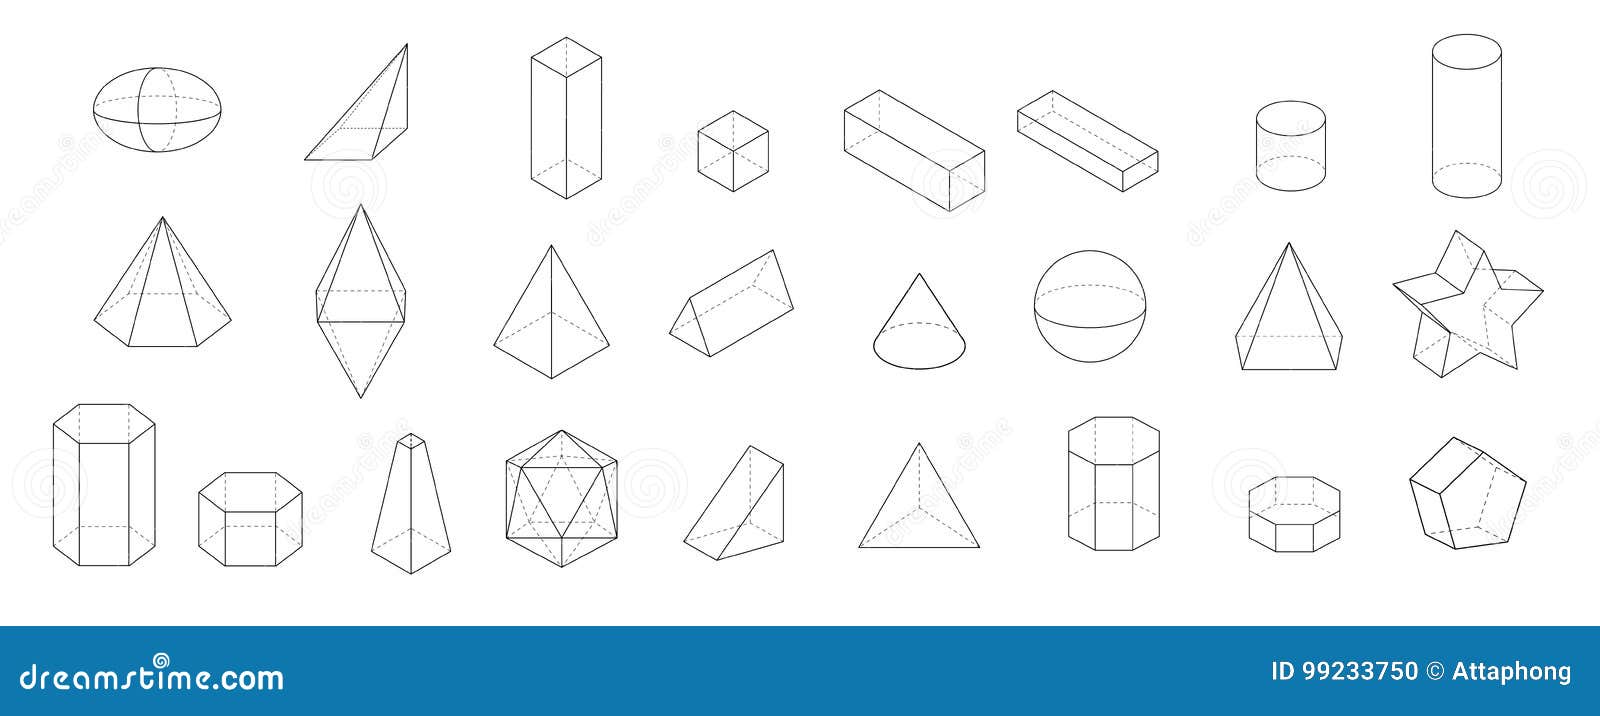 set of basic 3d geometric s. geometric solids  on a white background.